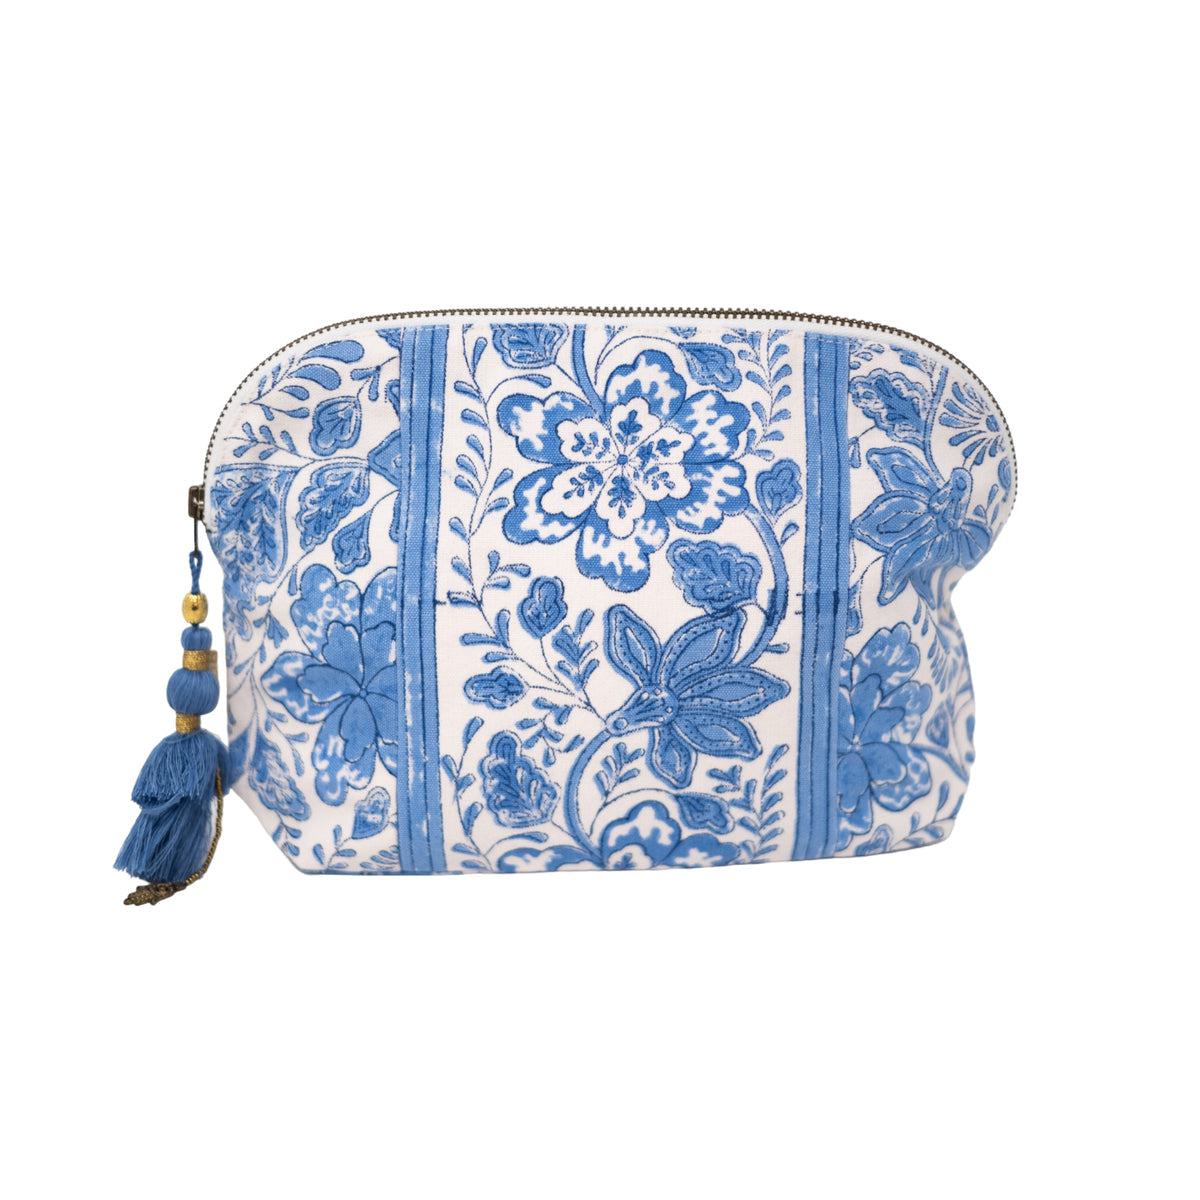 Clamshell Bag - Blue Floral